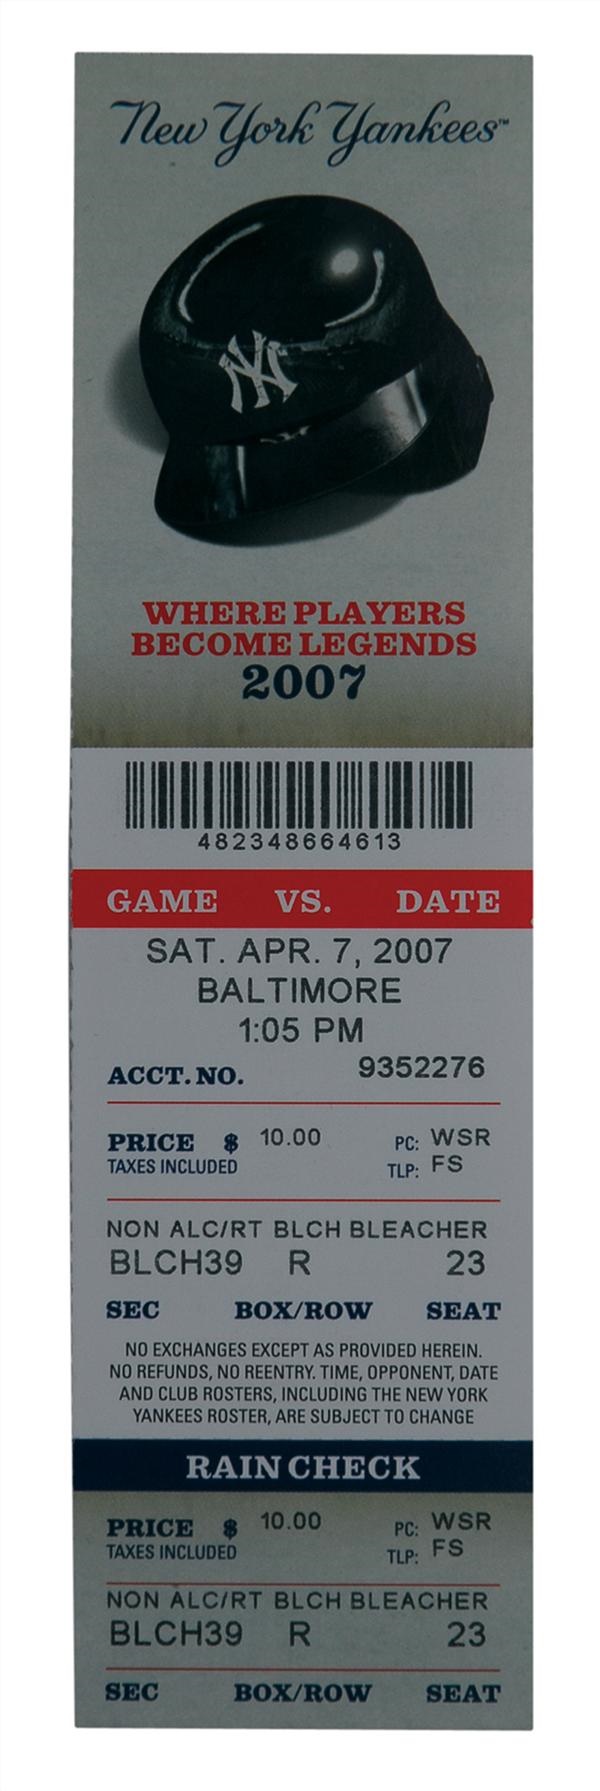 - Alex Rodriquez Autographed 3rd Base from Walk off Grand Slam with Ticket Stub